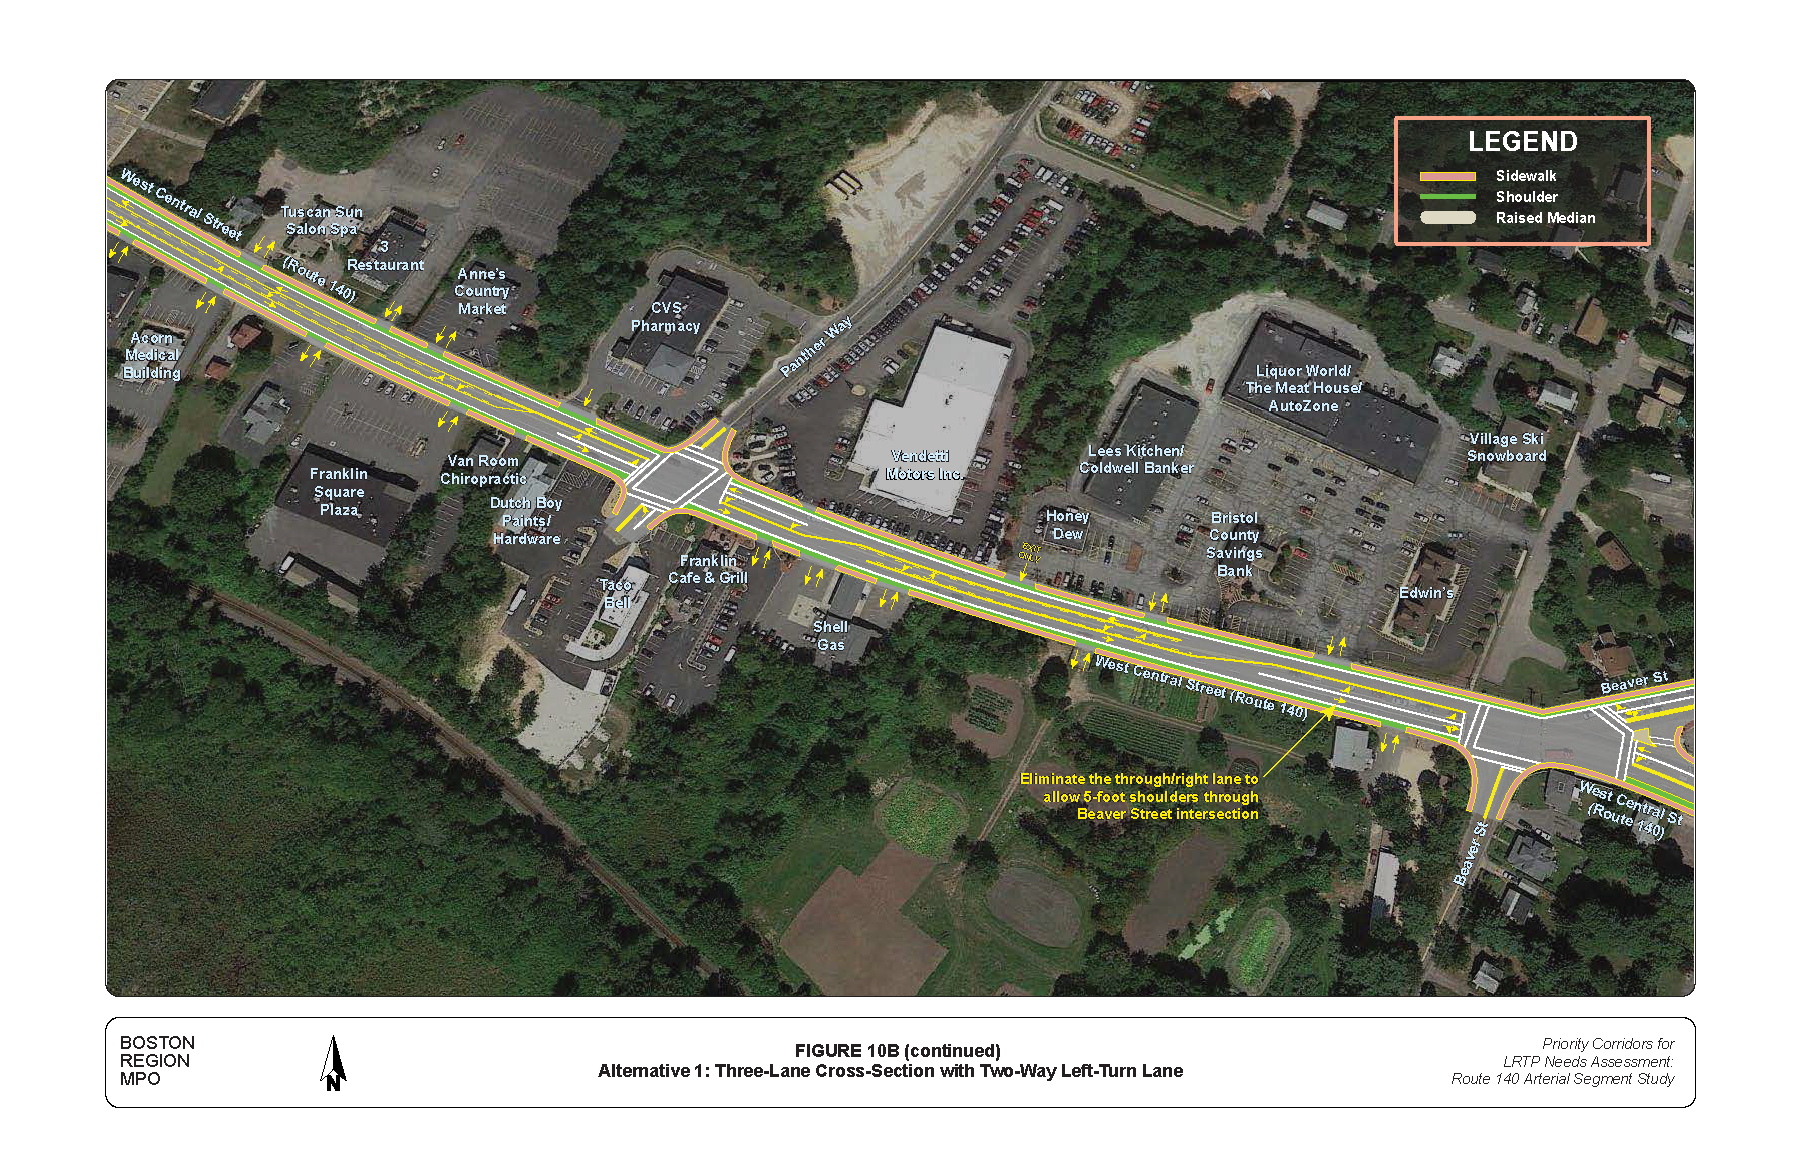 FIGURE 10B (continued): Alternative 1: Three-Lane Cross-Section with Two-Way Left-Turn Lane. Aerial-view map that illustrates MPO staff “Improvement Alternative 1,” which recommends reconfiguring West Central Street into a three-lane cross-section with two-way left-turn lane.